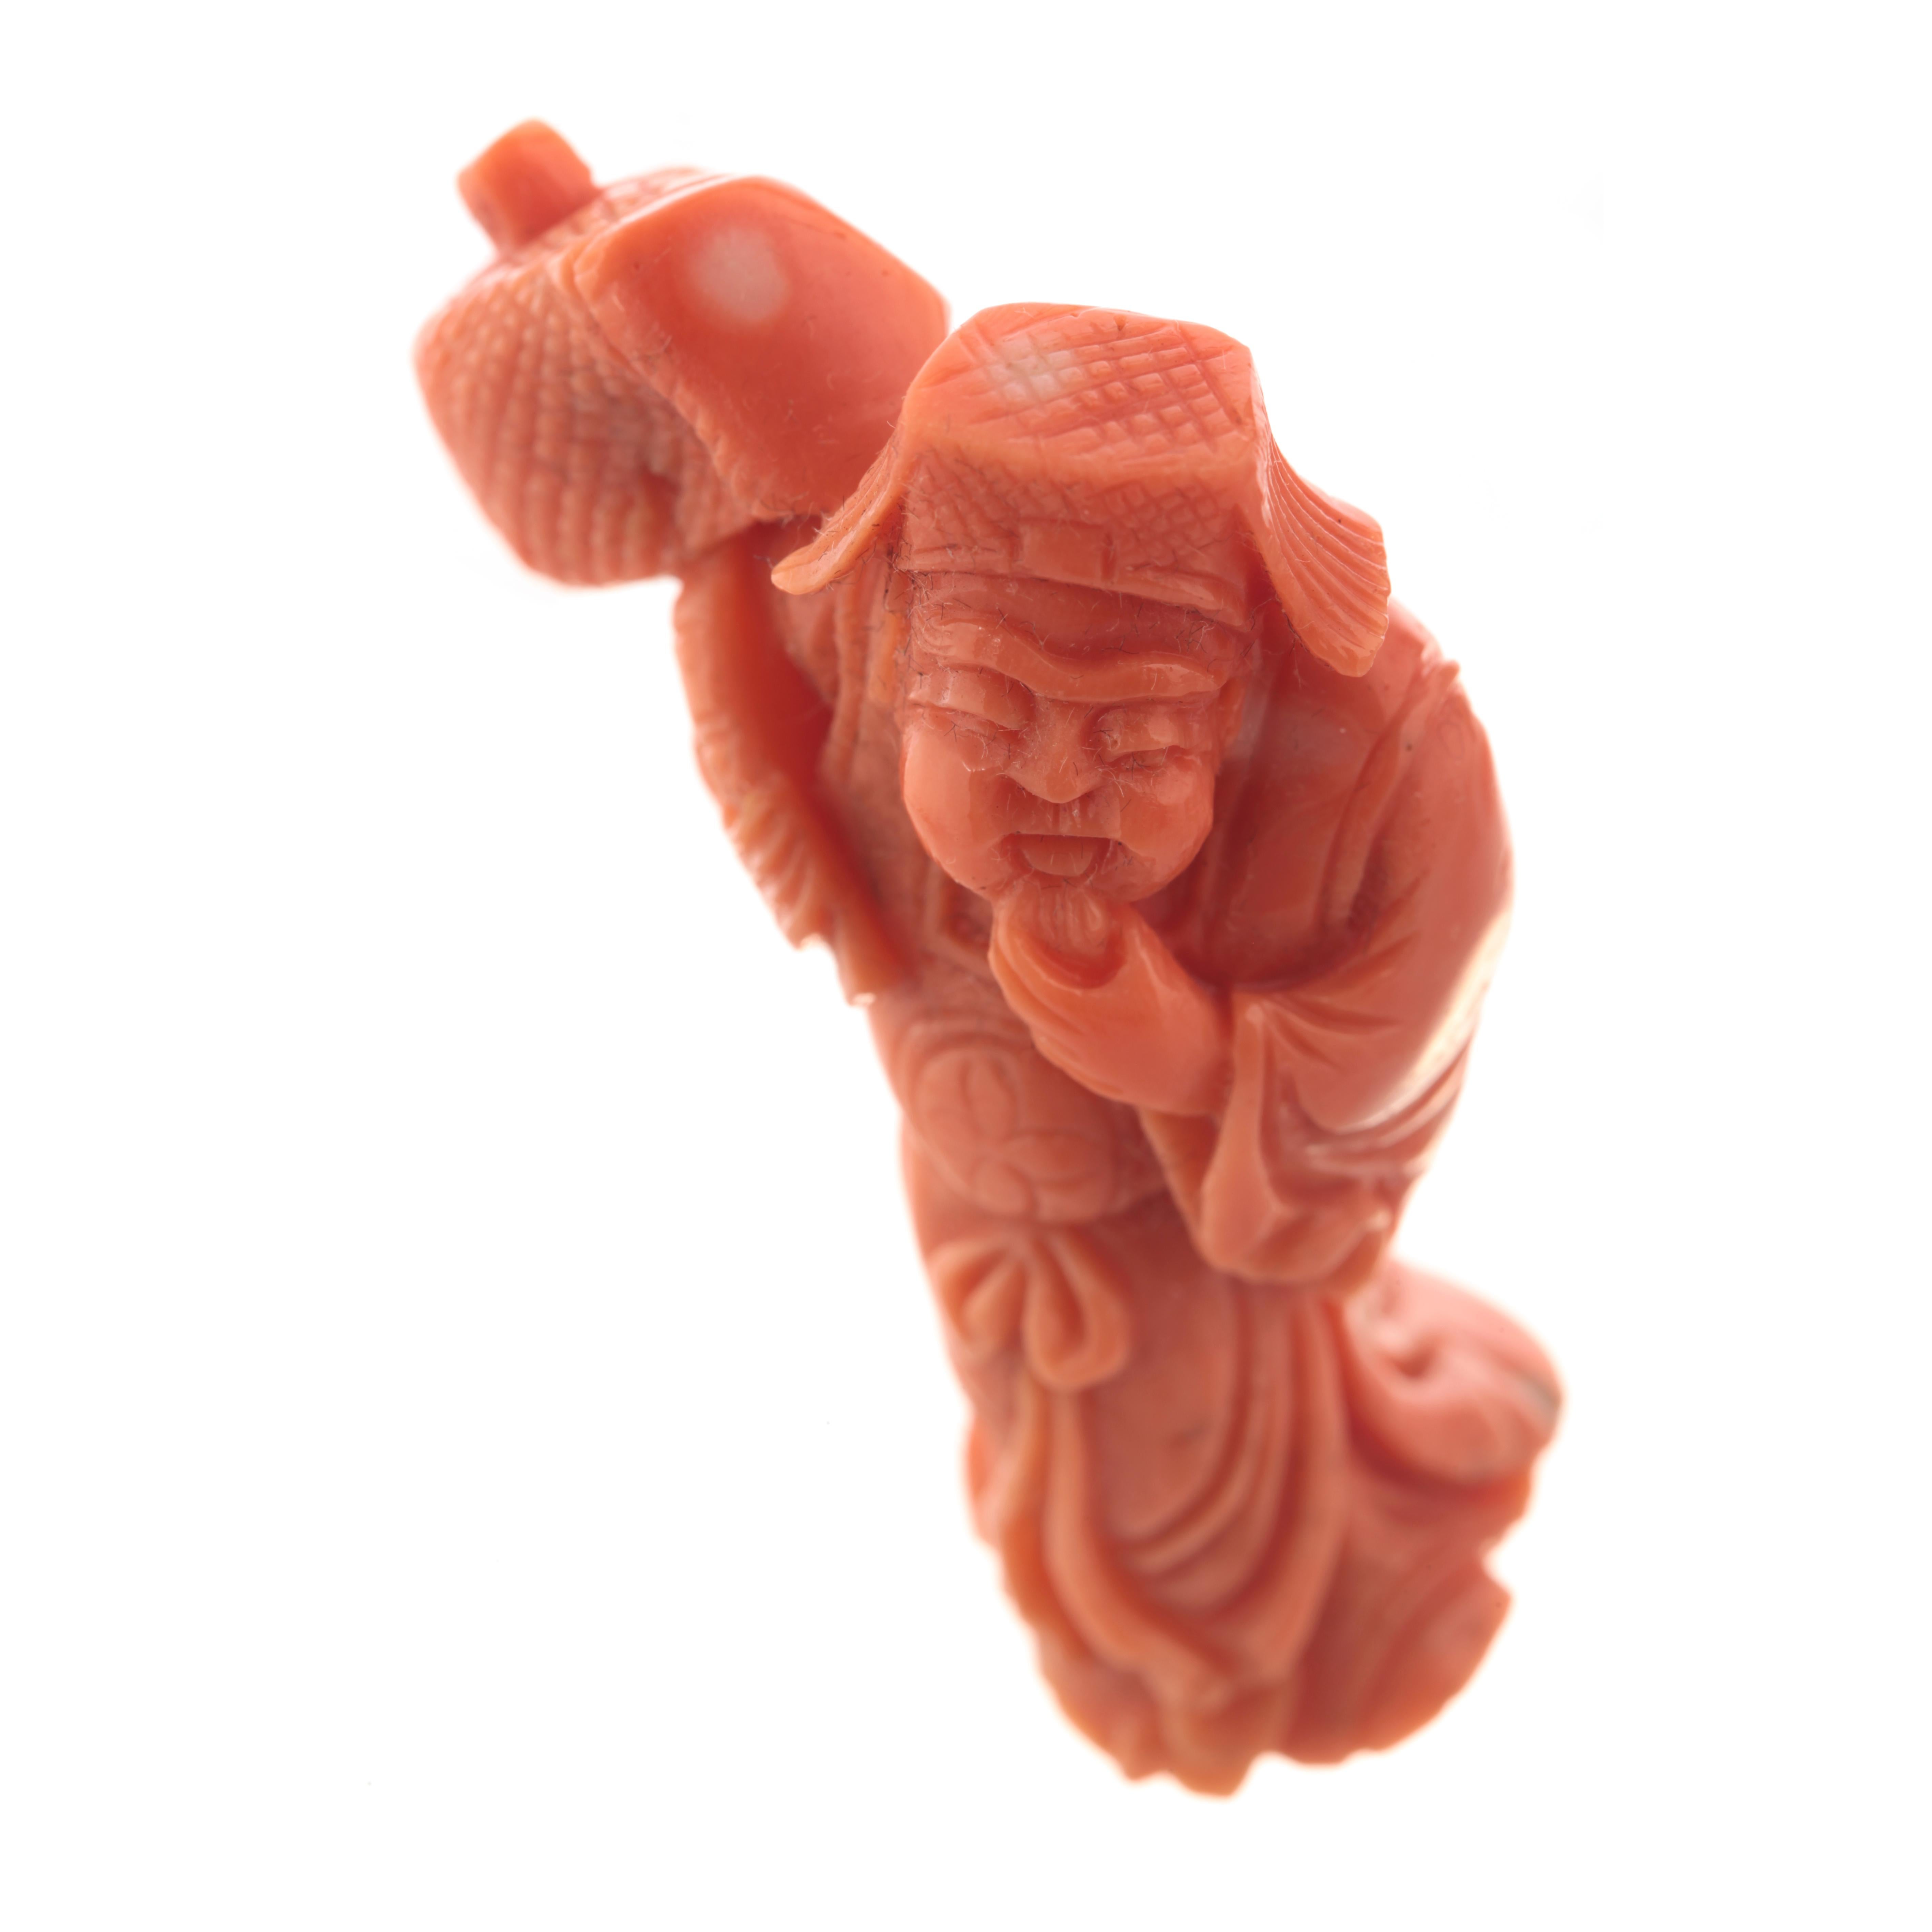 Wise Man Buddhist Carved Asian Decorative Art Statue Sculpture Natural Red Coral For Sale 1